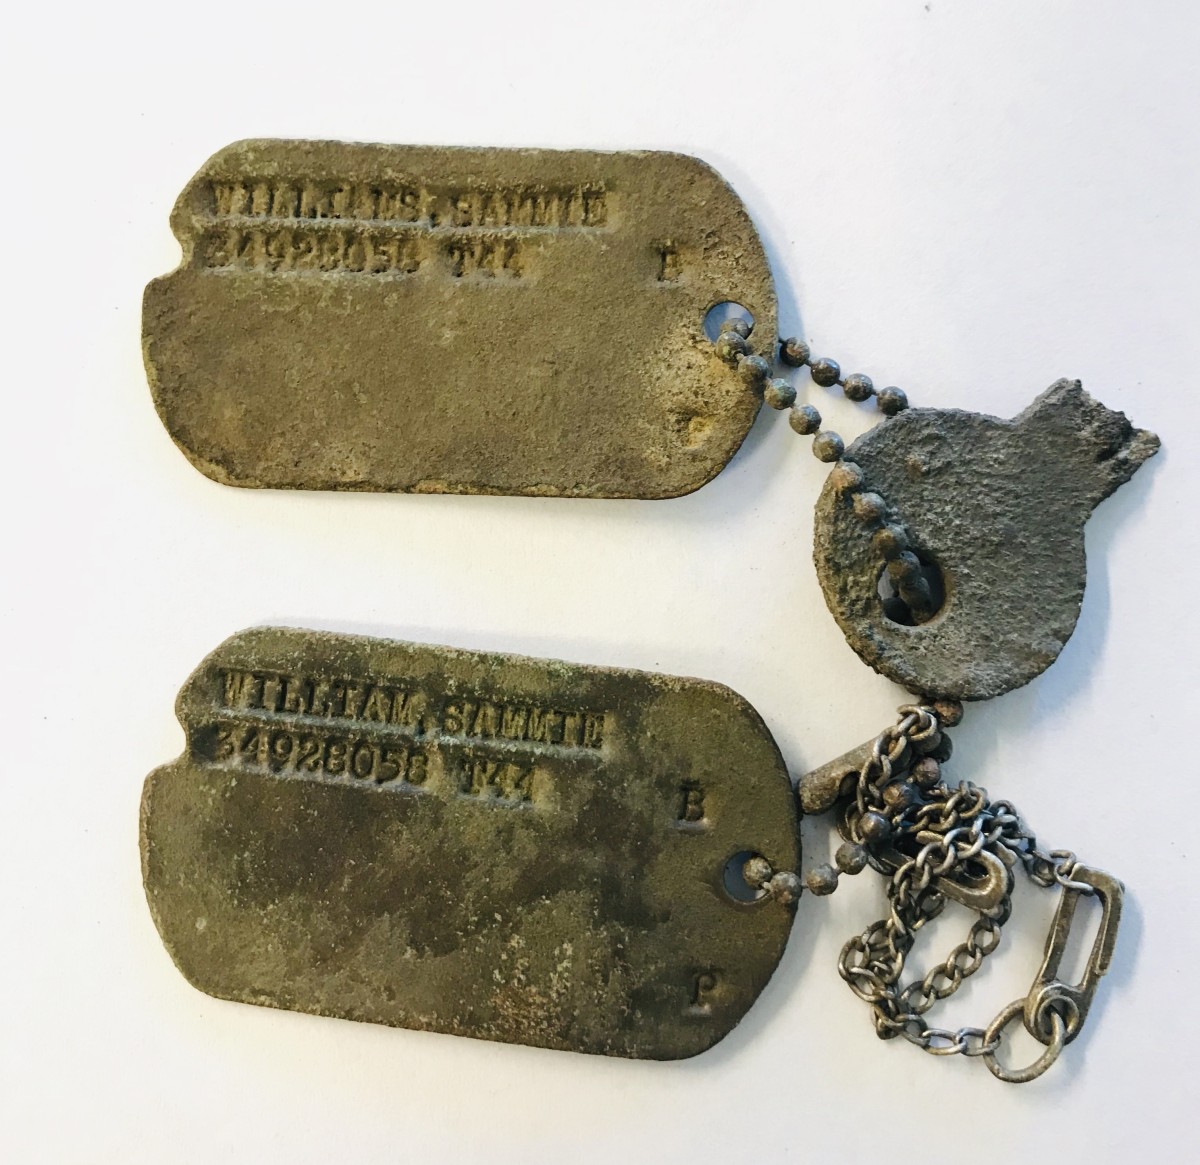 red dog tags military meaning